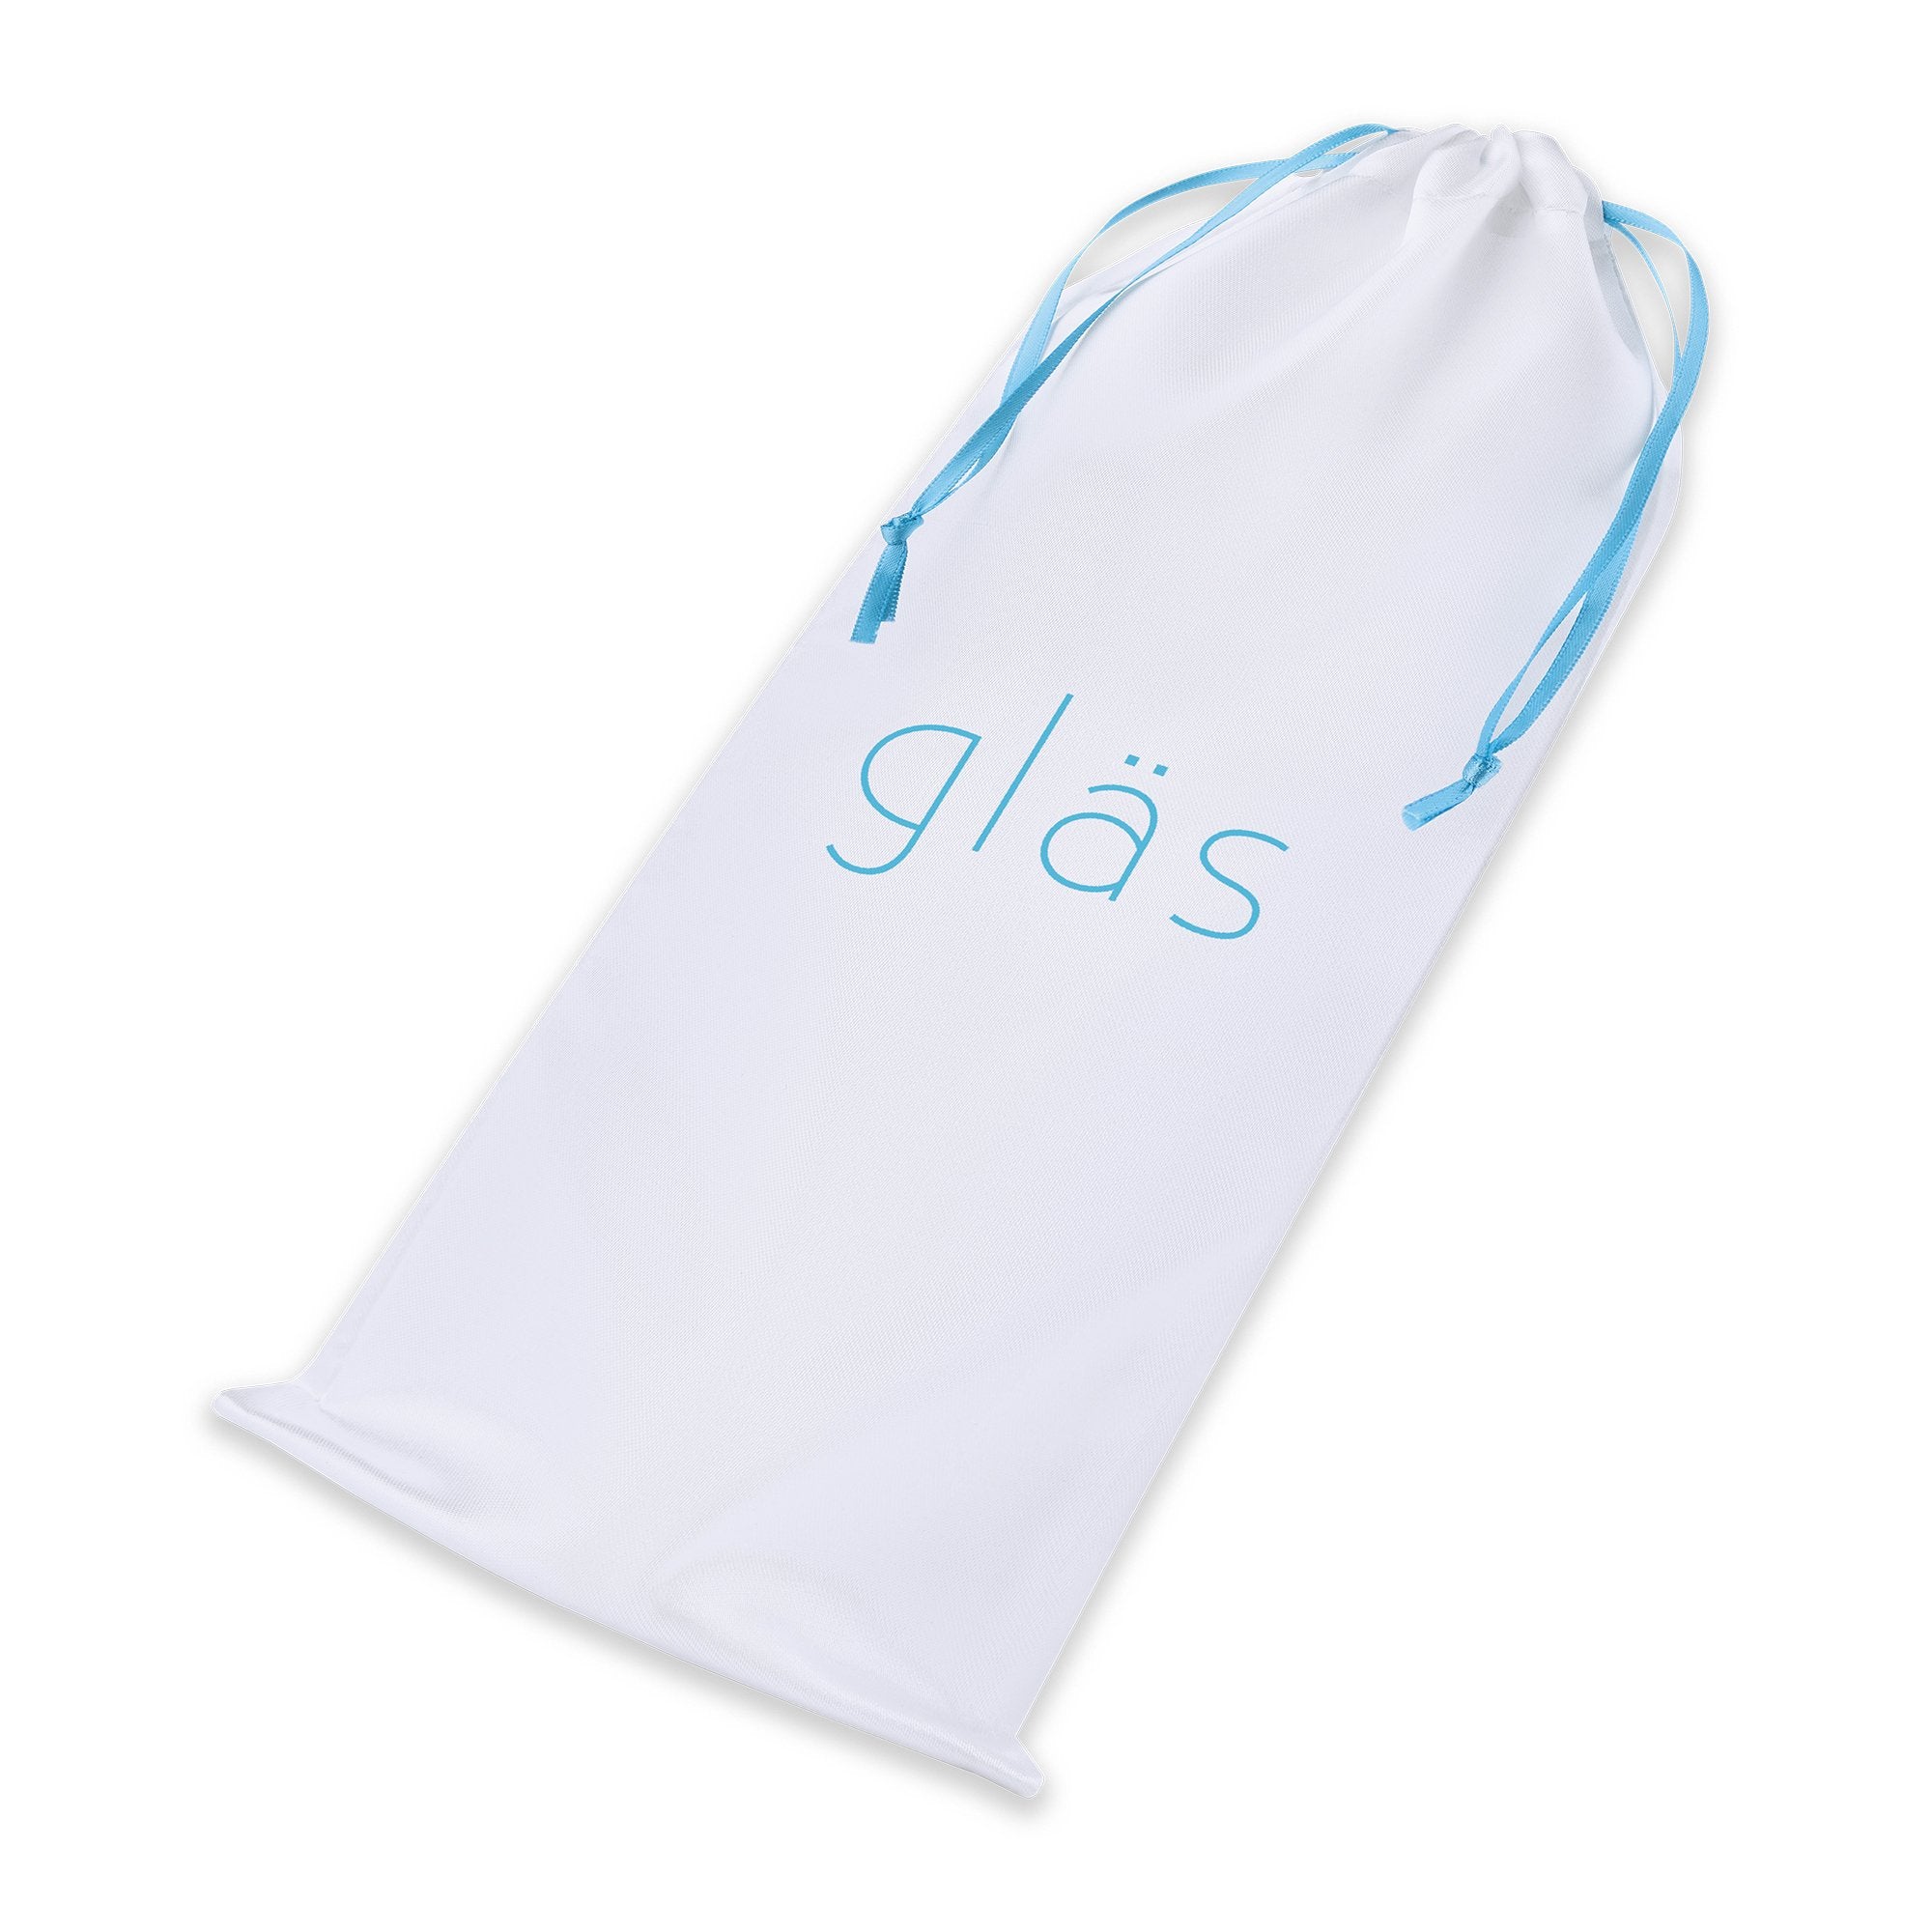 Storage Pouch of the Gläs 6.5 inch Full Tip Textured Glass Dildo